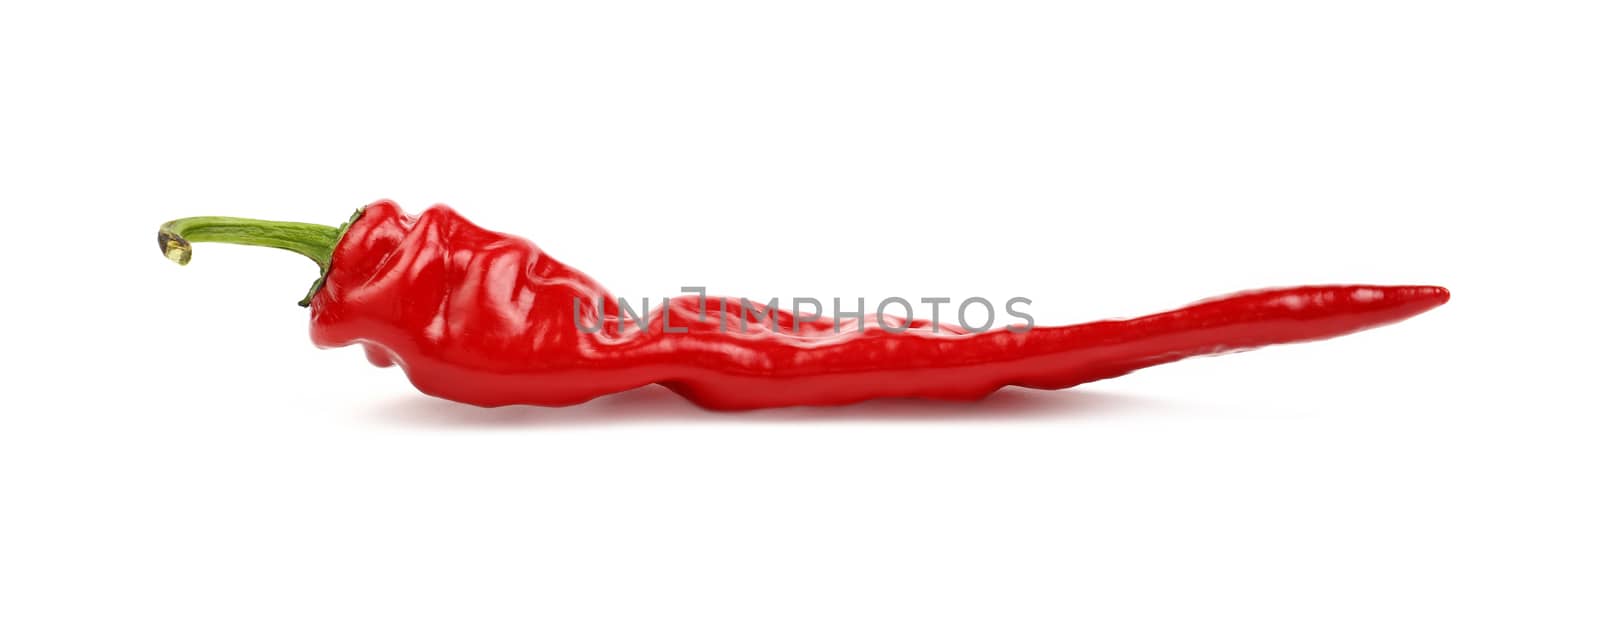 Red hot chili pepper close up isolated on white by BreakingTheWalls